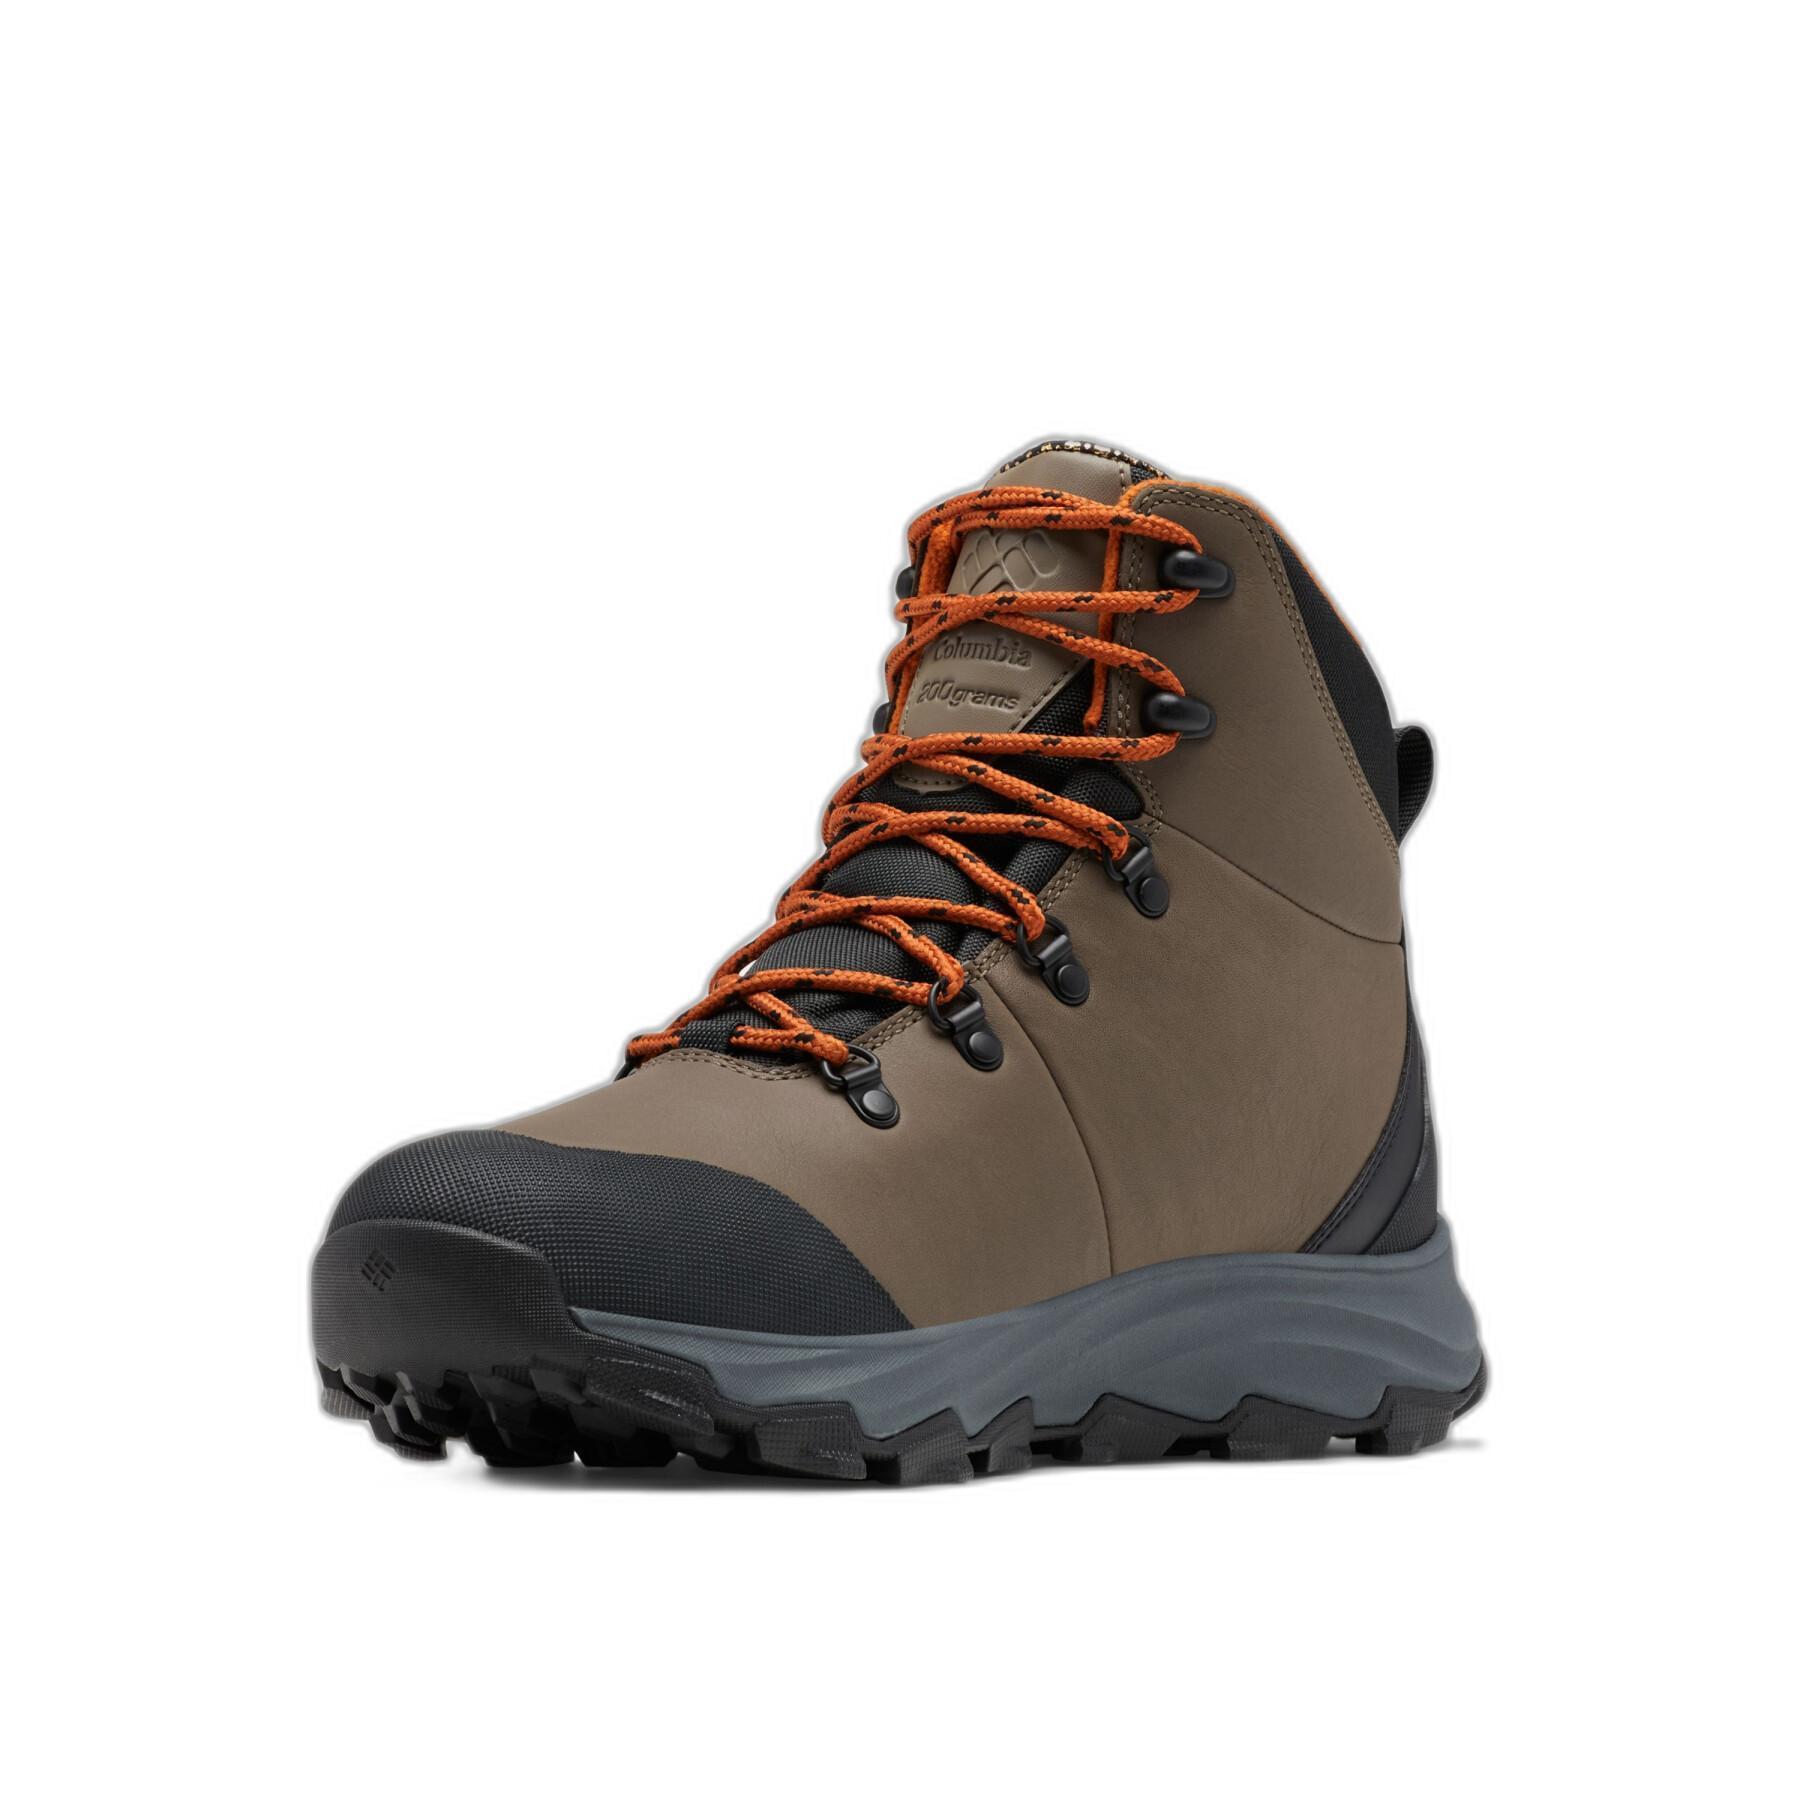 Bottes d'hiver Columbia Expeditionist™